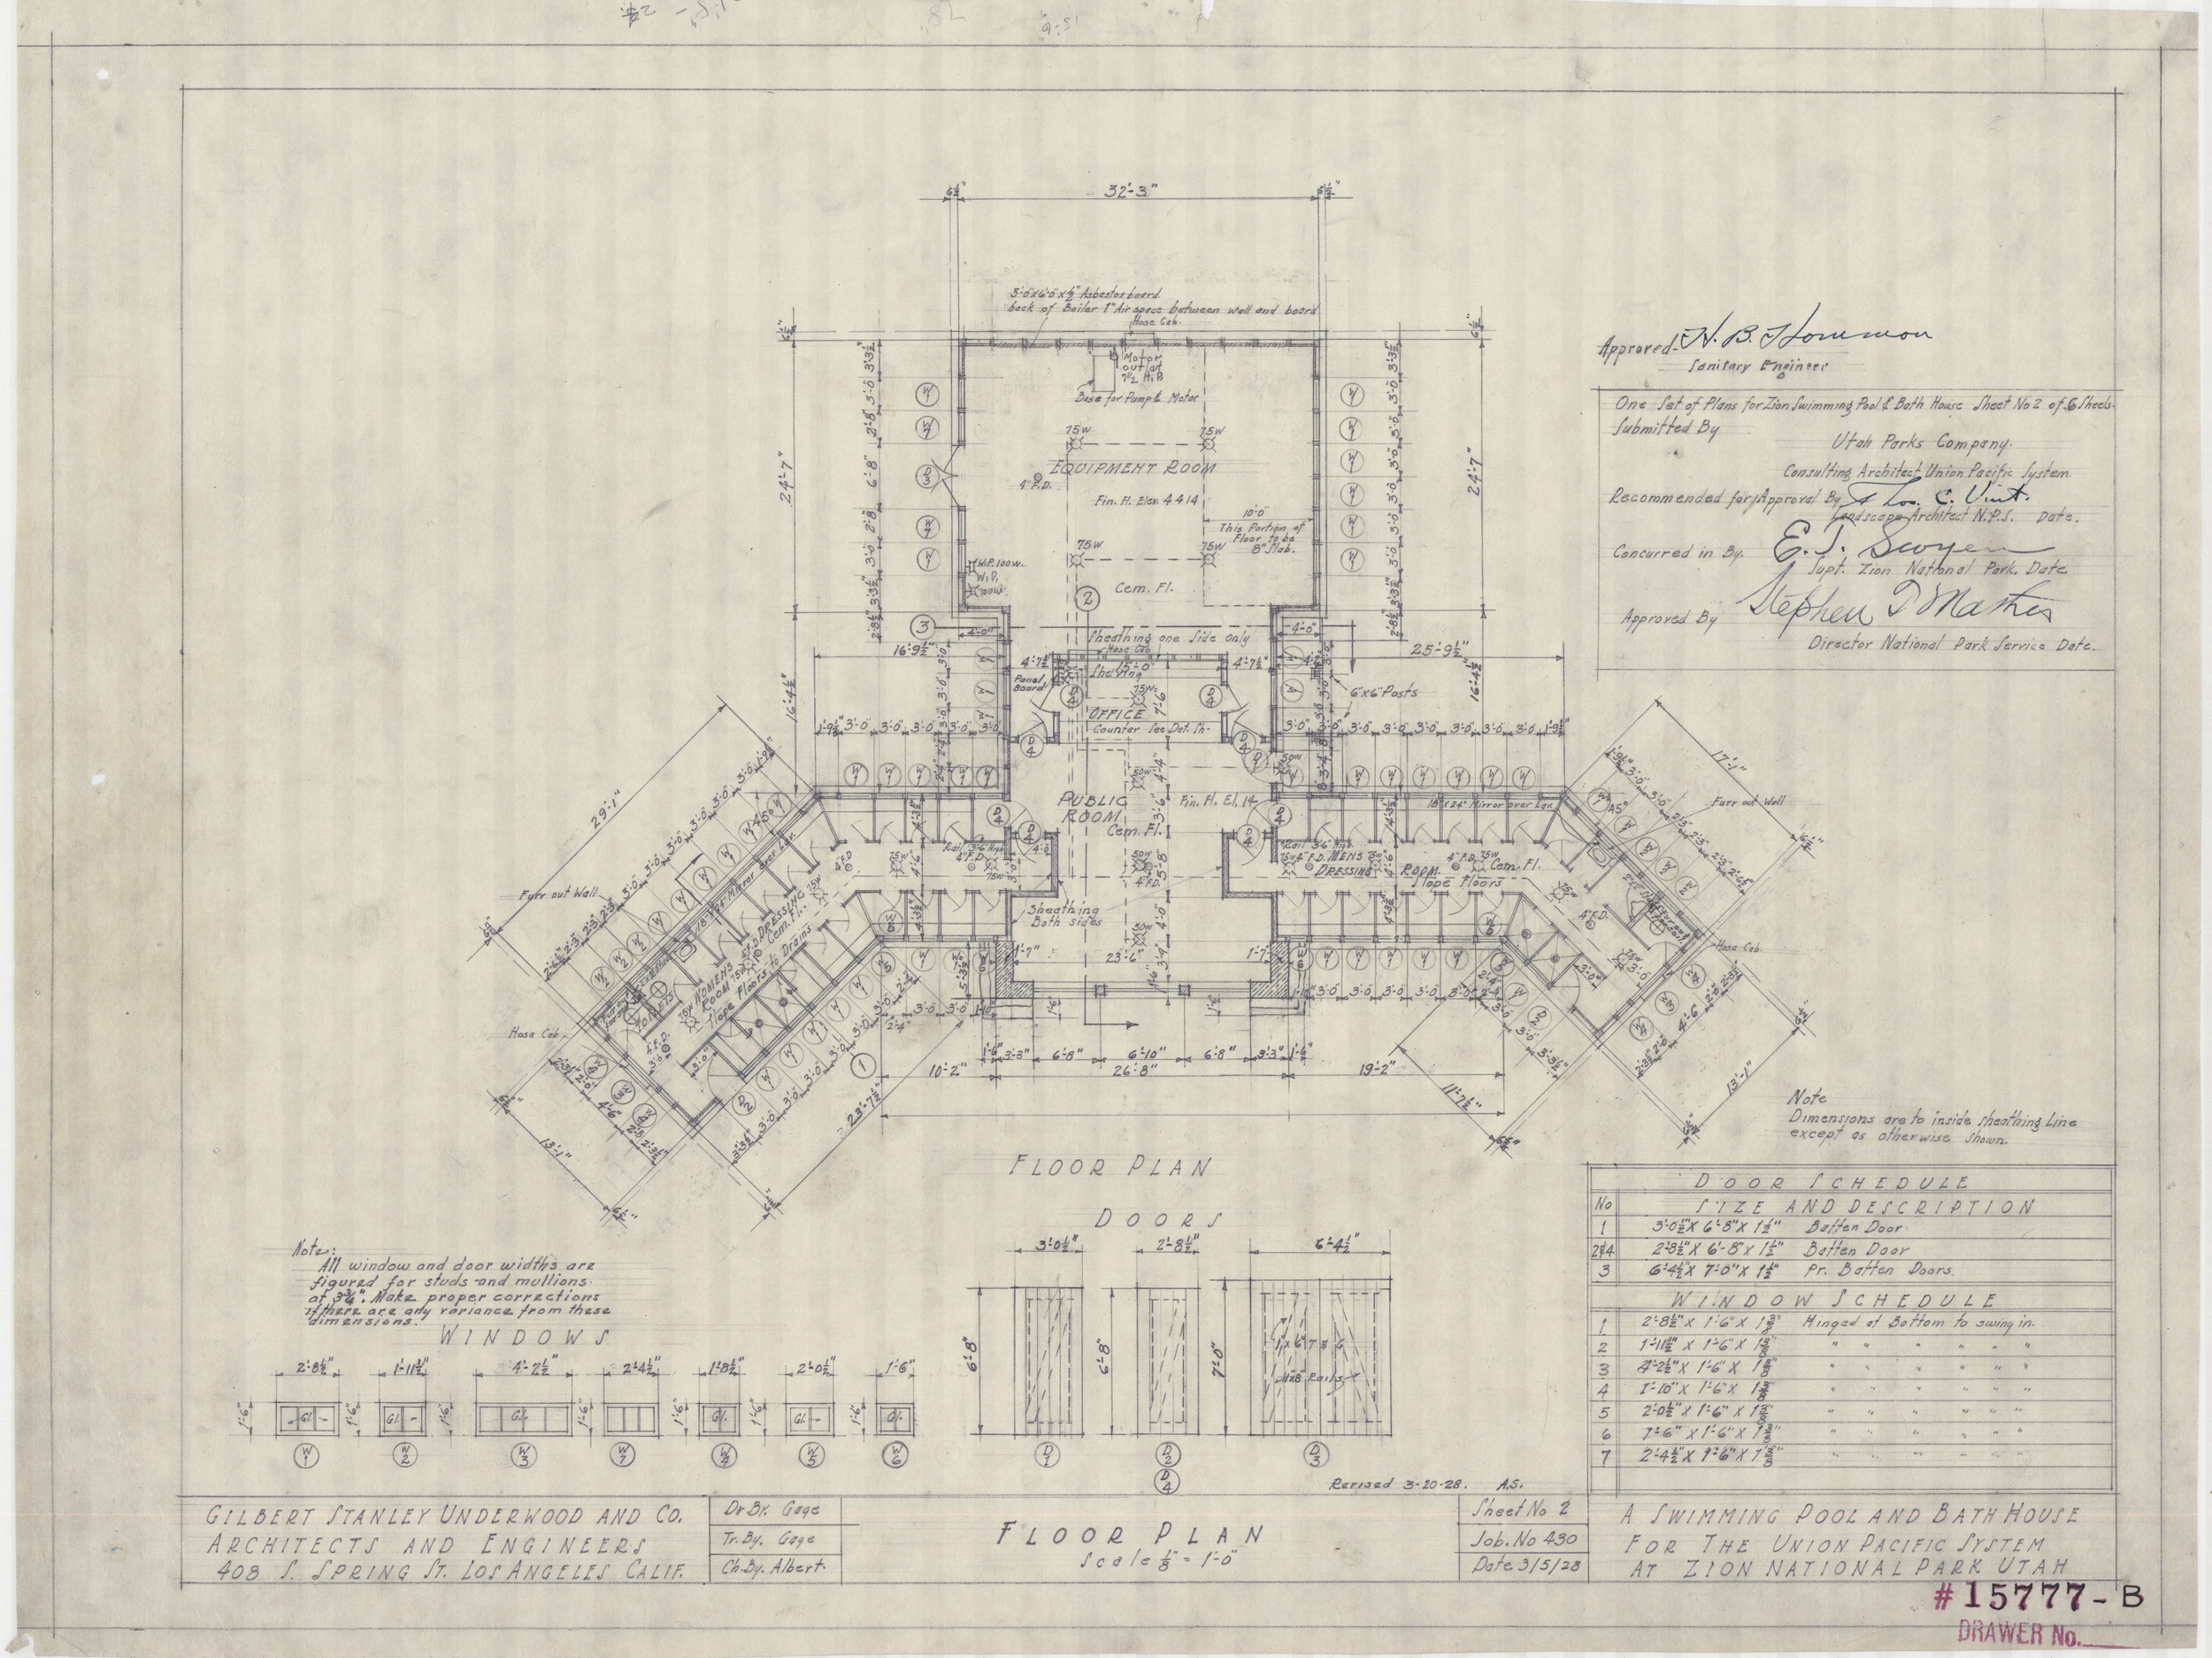 Architectural drawing of swimming pool & bath house at Zion National Park, Utah, floor plan, March 5, 1928, sheet no. 2, floor plans